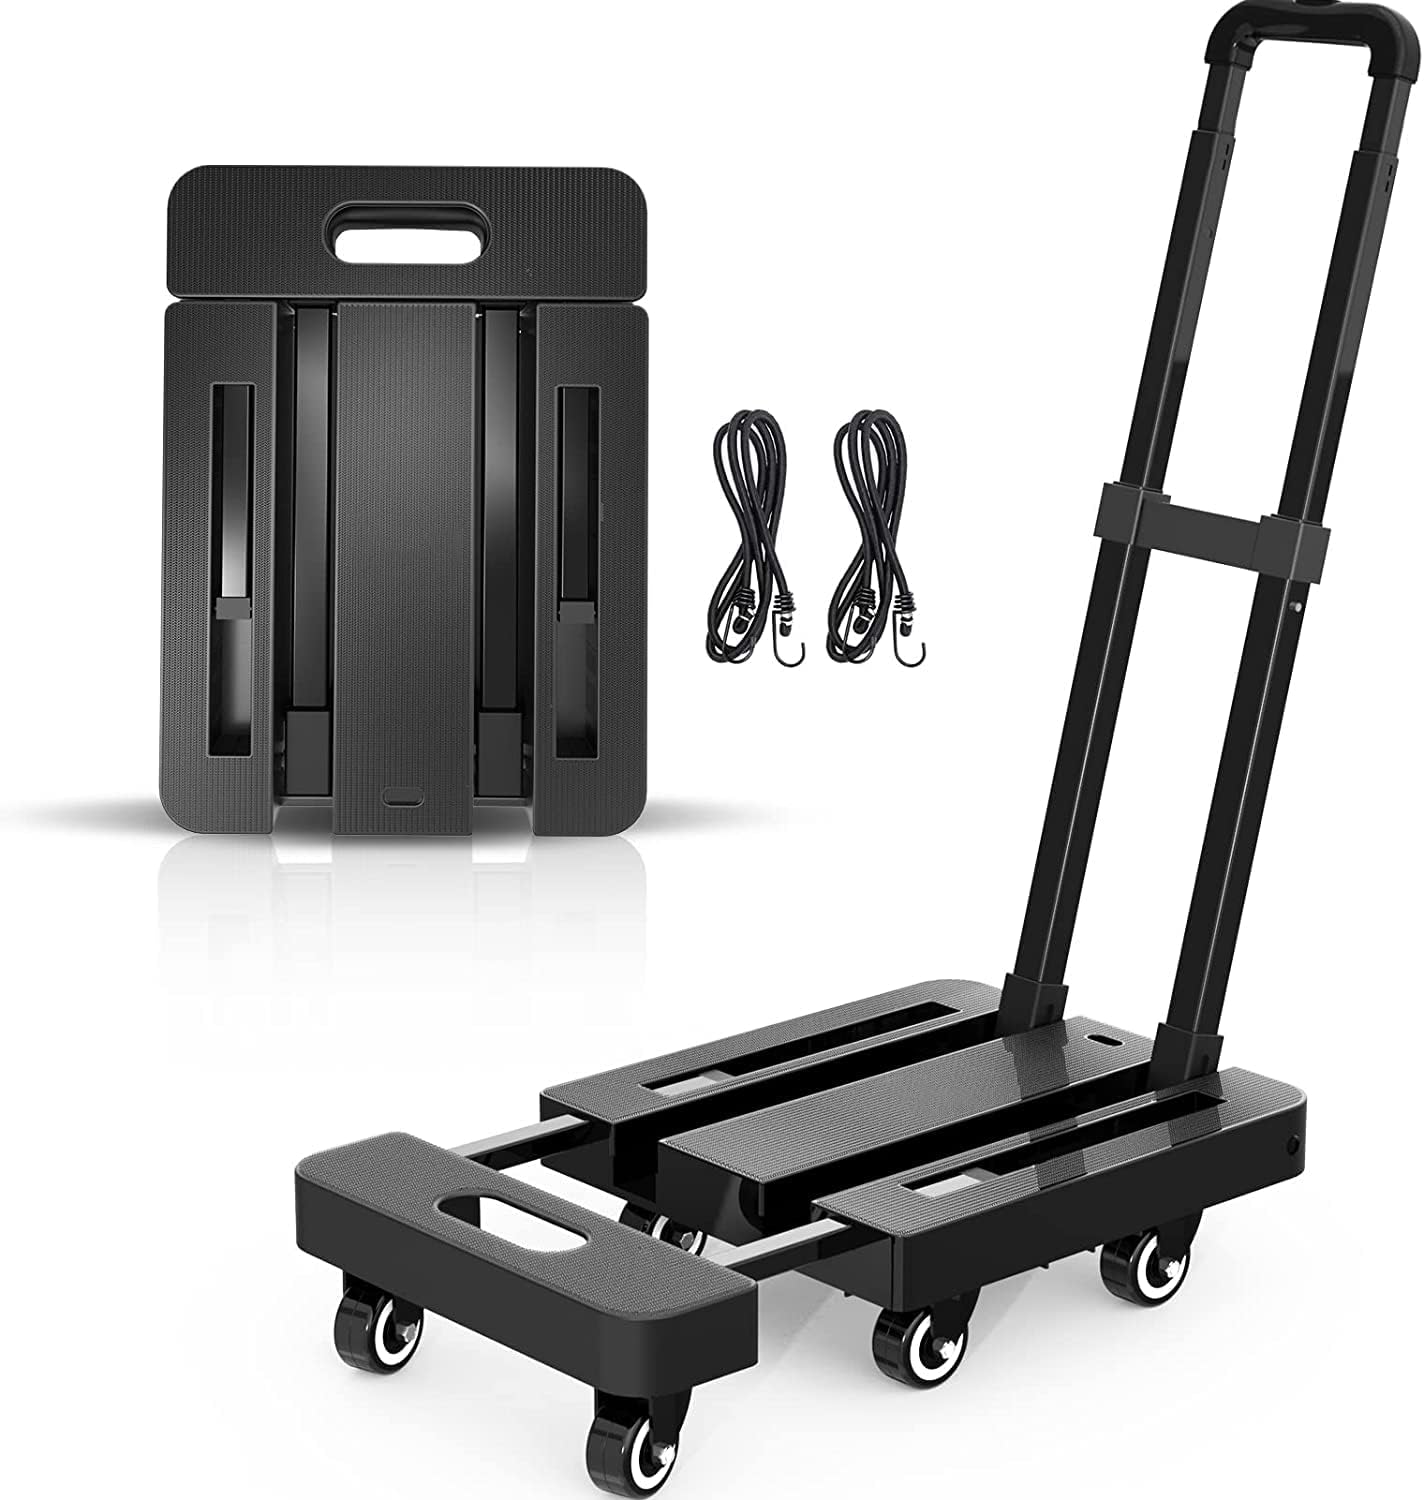 Cheston Portable Folding Platform Trolley for Material Handling I 6 Wheels & 2 Elastic Ropes I Utility Luggage Cart I Telescopic Handle I Heavy Duty Hand Truck for Groceries, 150kg Capacity Luggage